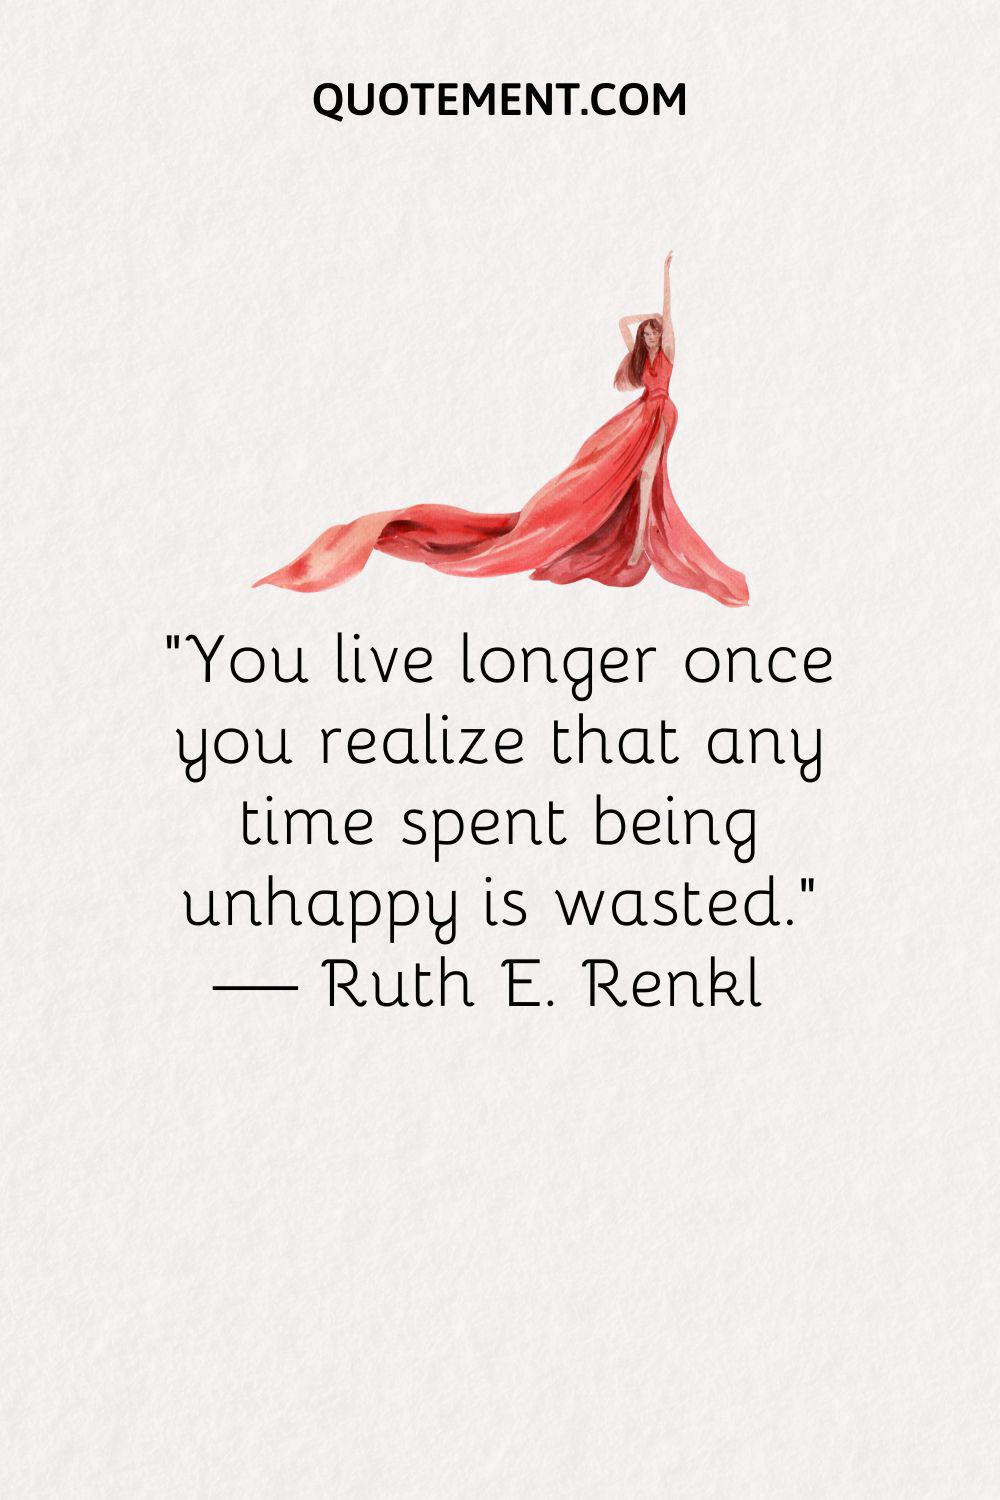 “You live longer once you realize that any time spent being unhappy is wasted.” — Ruth E. Renkl